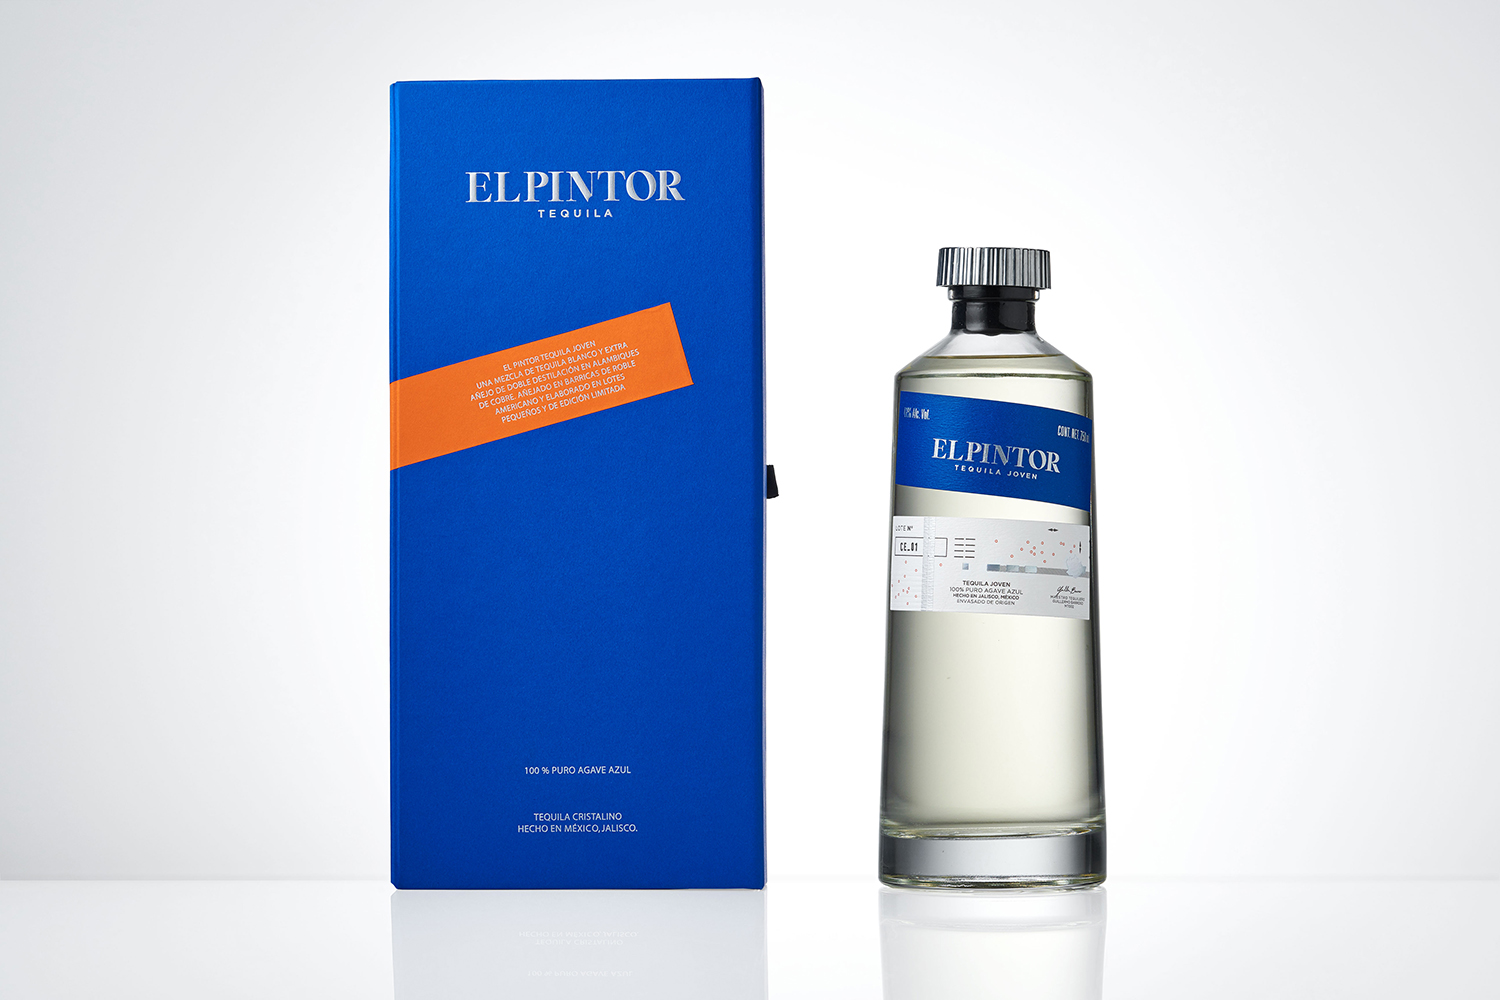 Graphic identity and packaging by Anagrama for mezcal and tequila brand El Pintor